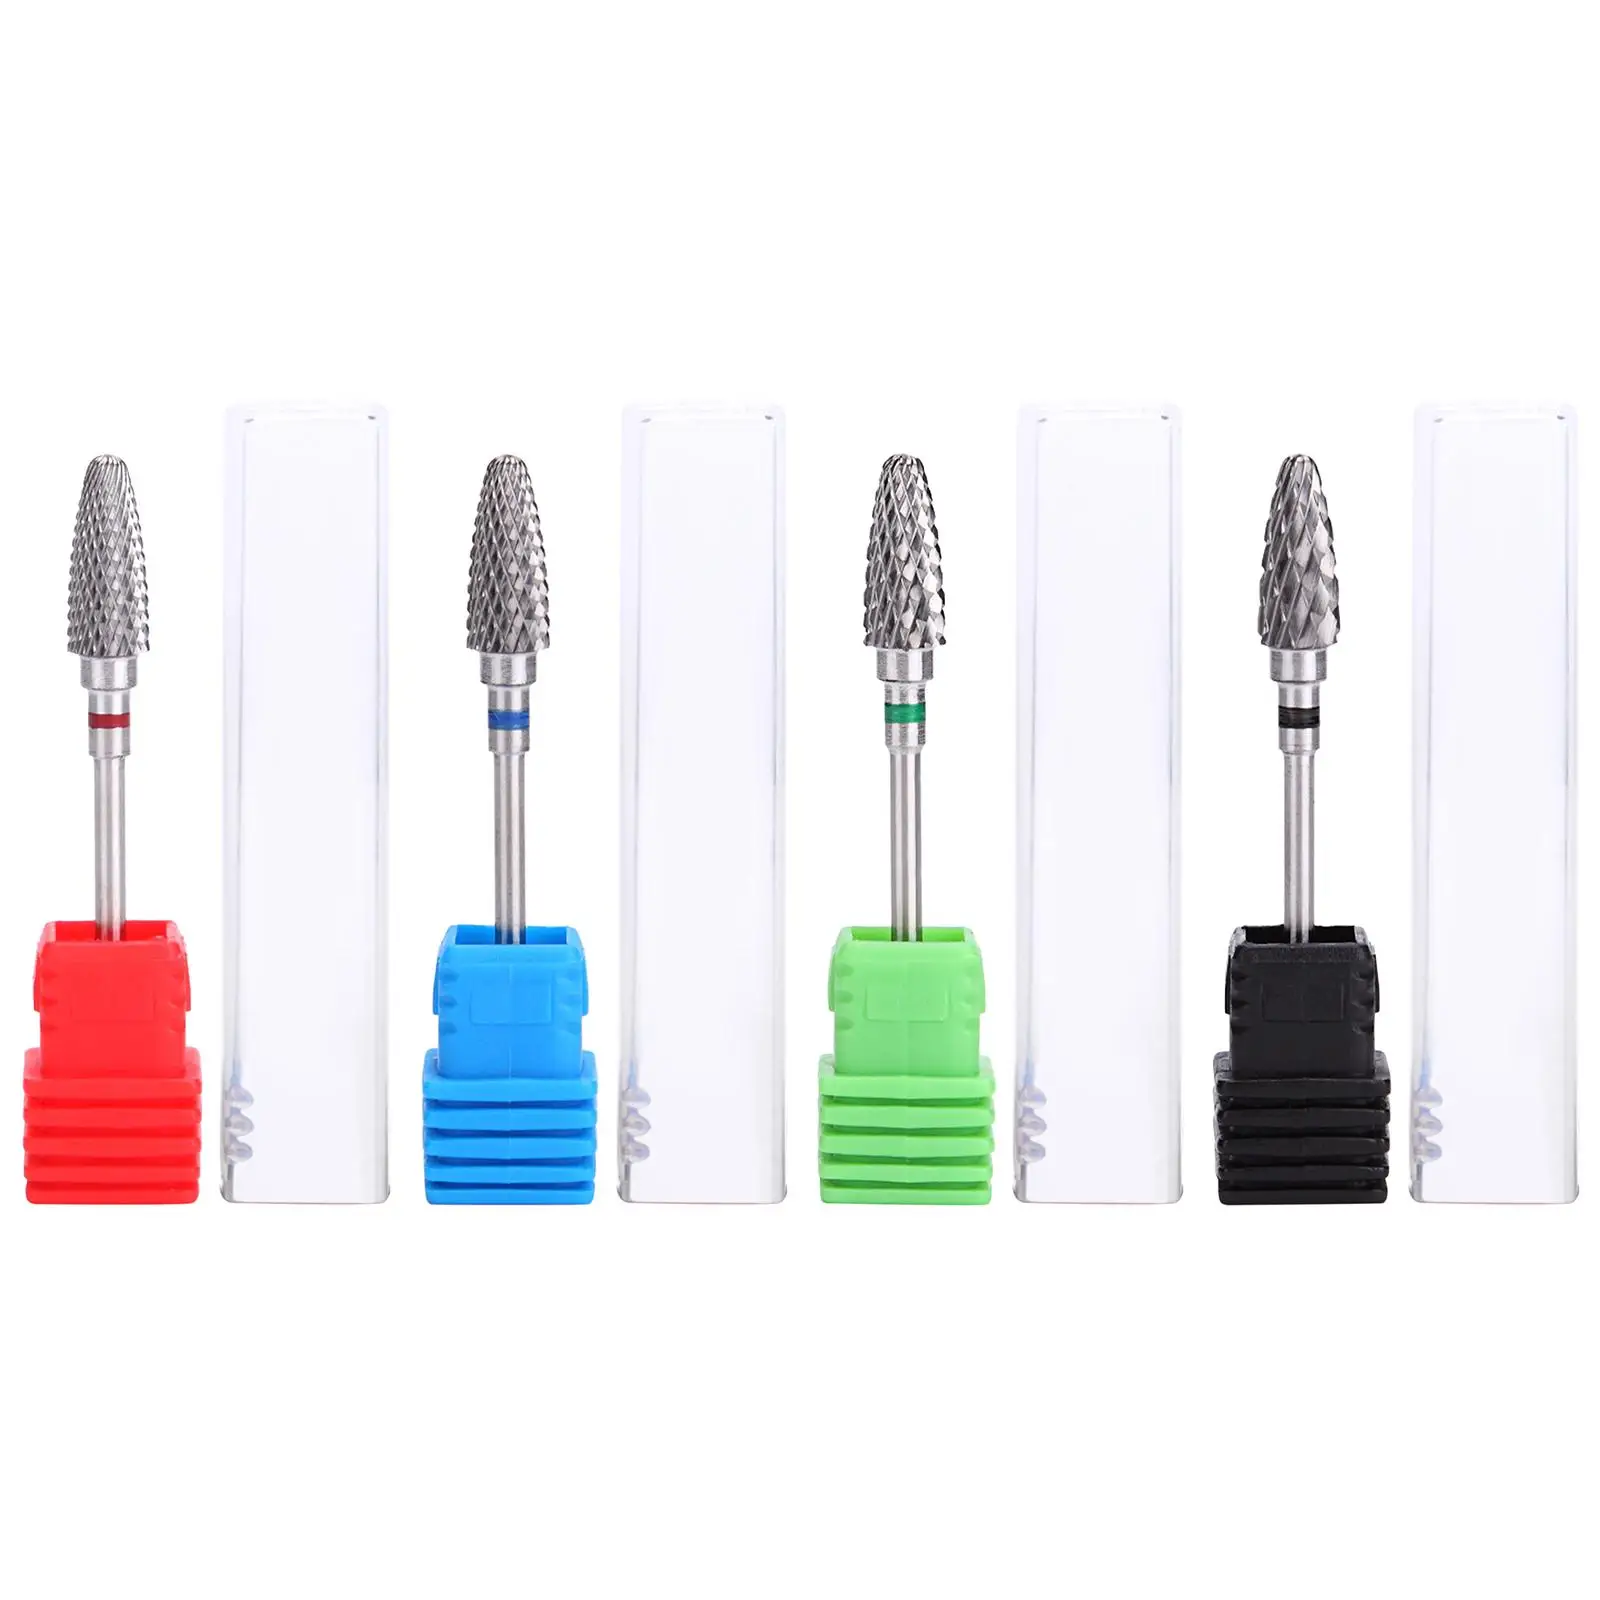 Rotary Nail Drill Bit Manicure Grinding Head Durable for Electric Pedicure Manicure Tool Easy to Use Sturdy Easy to Install